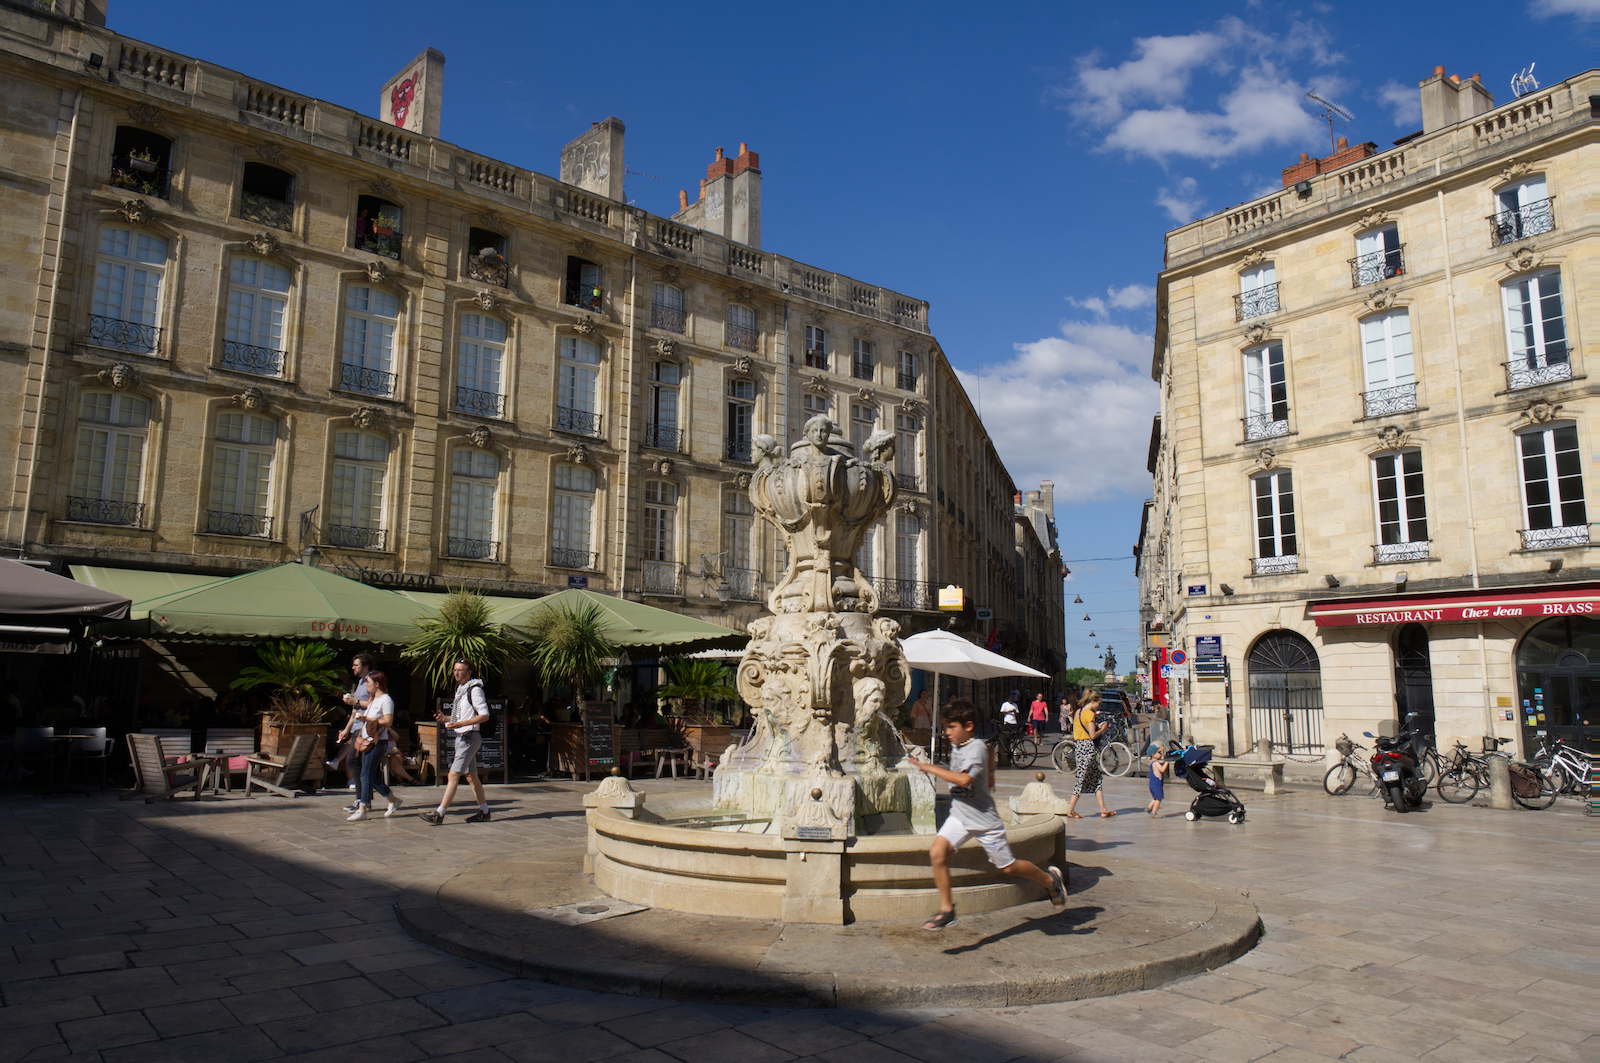 Sample image shot using the Sony Alpha A6700 of Bordeaux